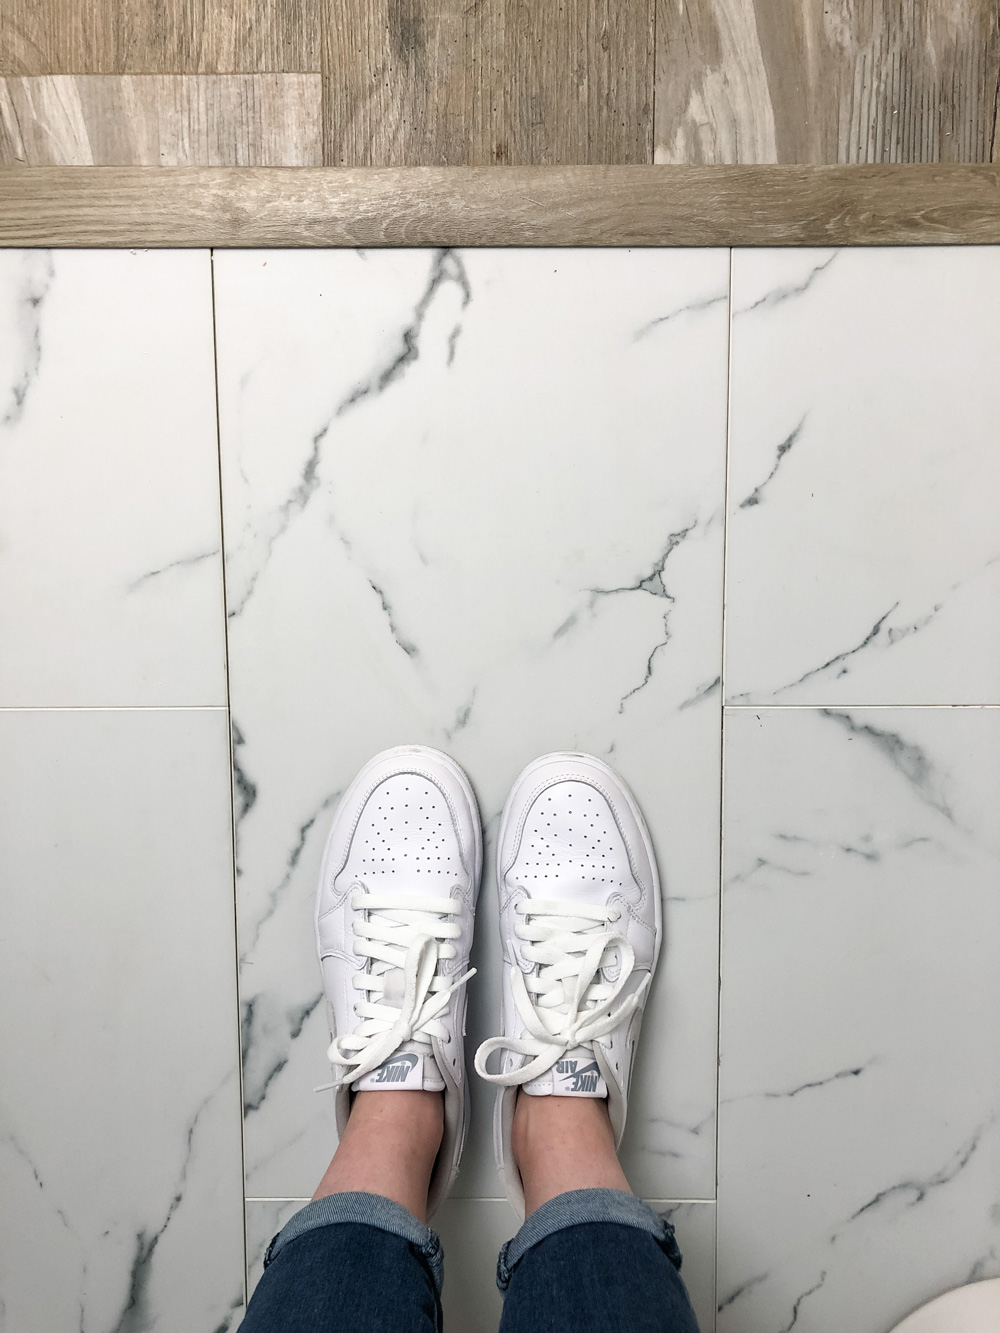 Women’s shoes standing on marble tile flooring with wood trim.